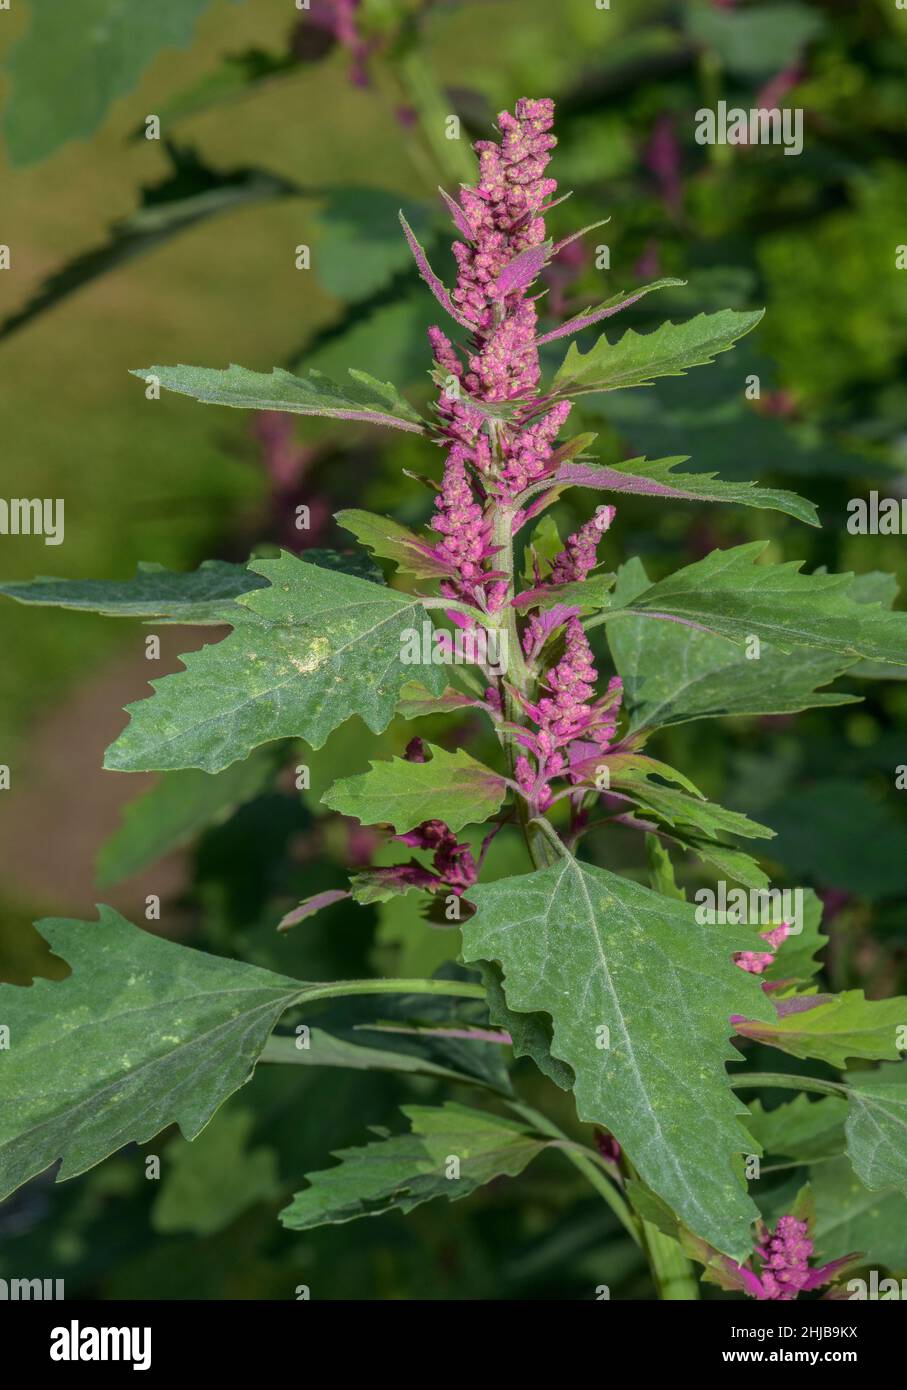 Tree Spinach, Chenopodium giganteum planted as a vegetable crop. Stock Photo